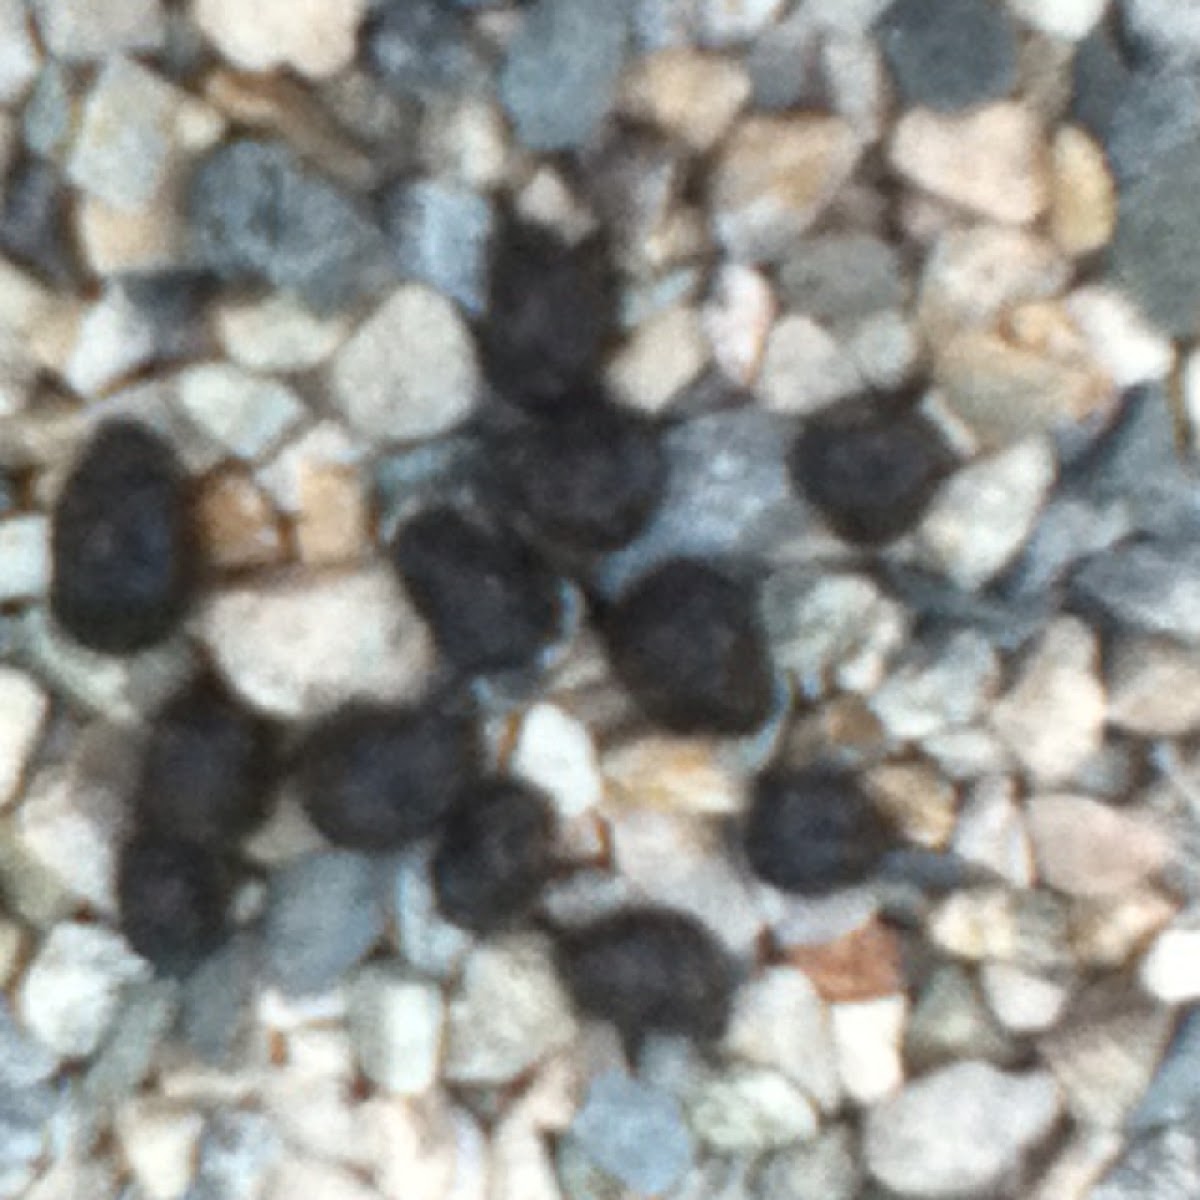 Eastern Cottontail Droppings